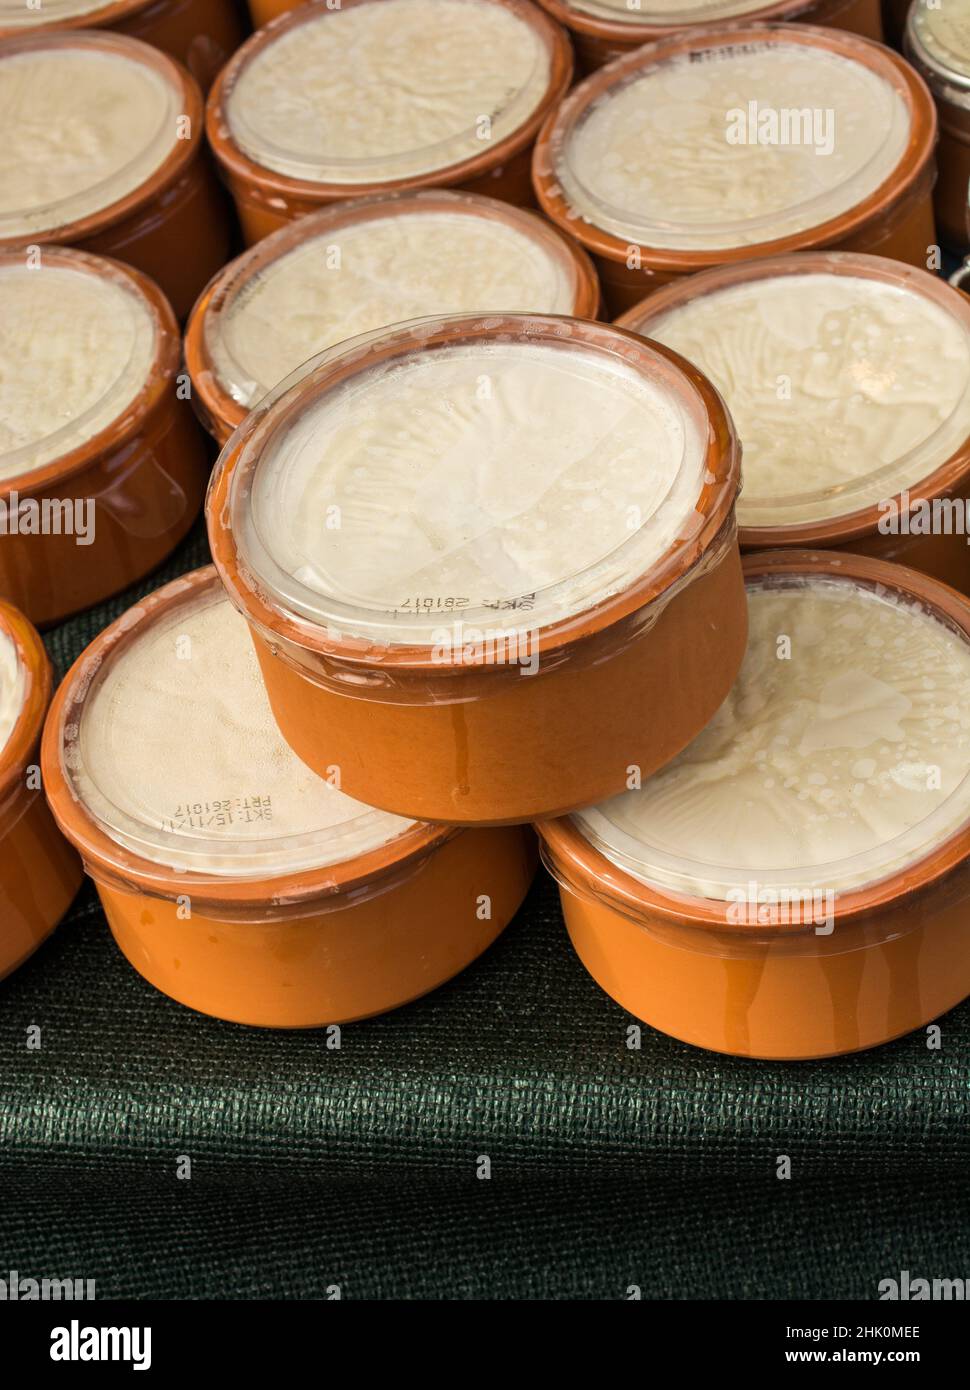 Kaymak, a creamy dairy product similar to cream, made from milk, in clay pots. Stock Photo